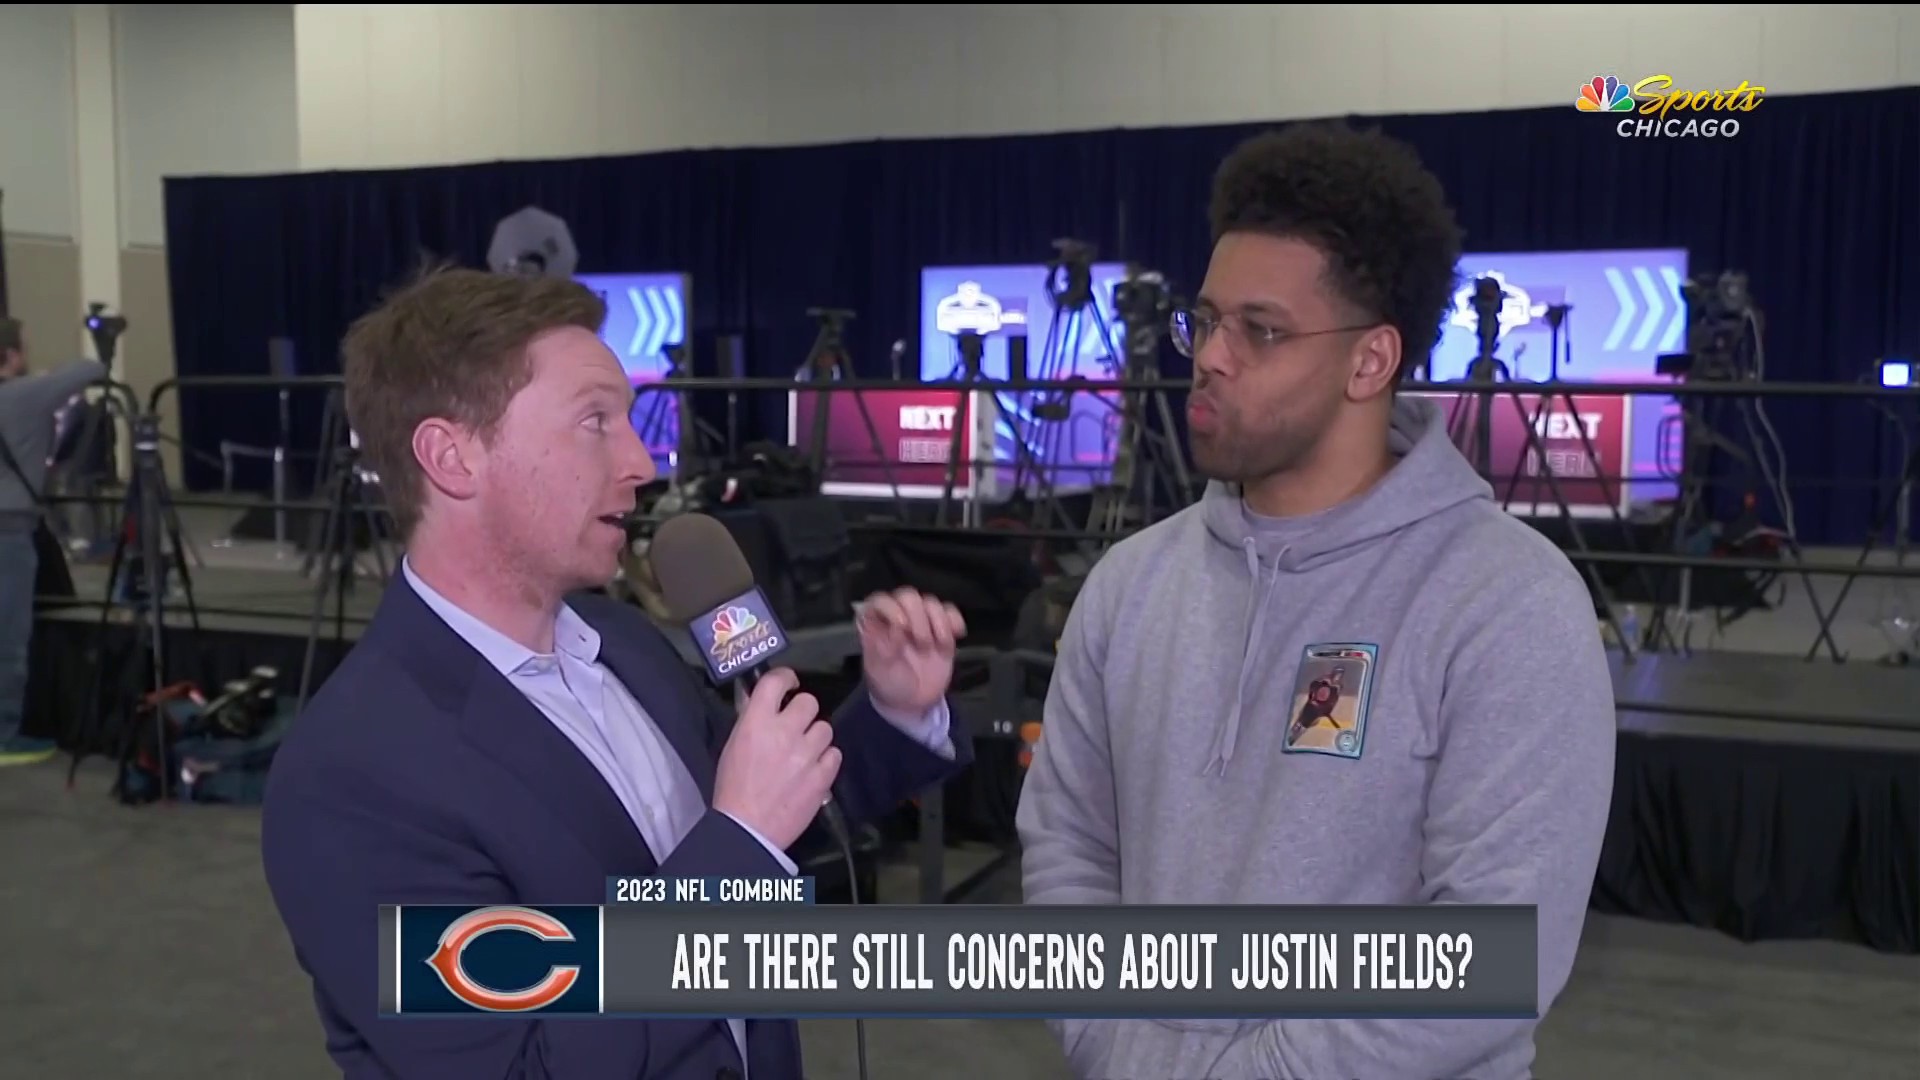 Michael Smith Justin Fields is a franchise QB if Bears give him support